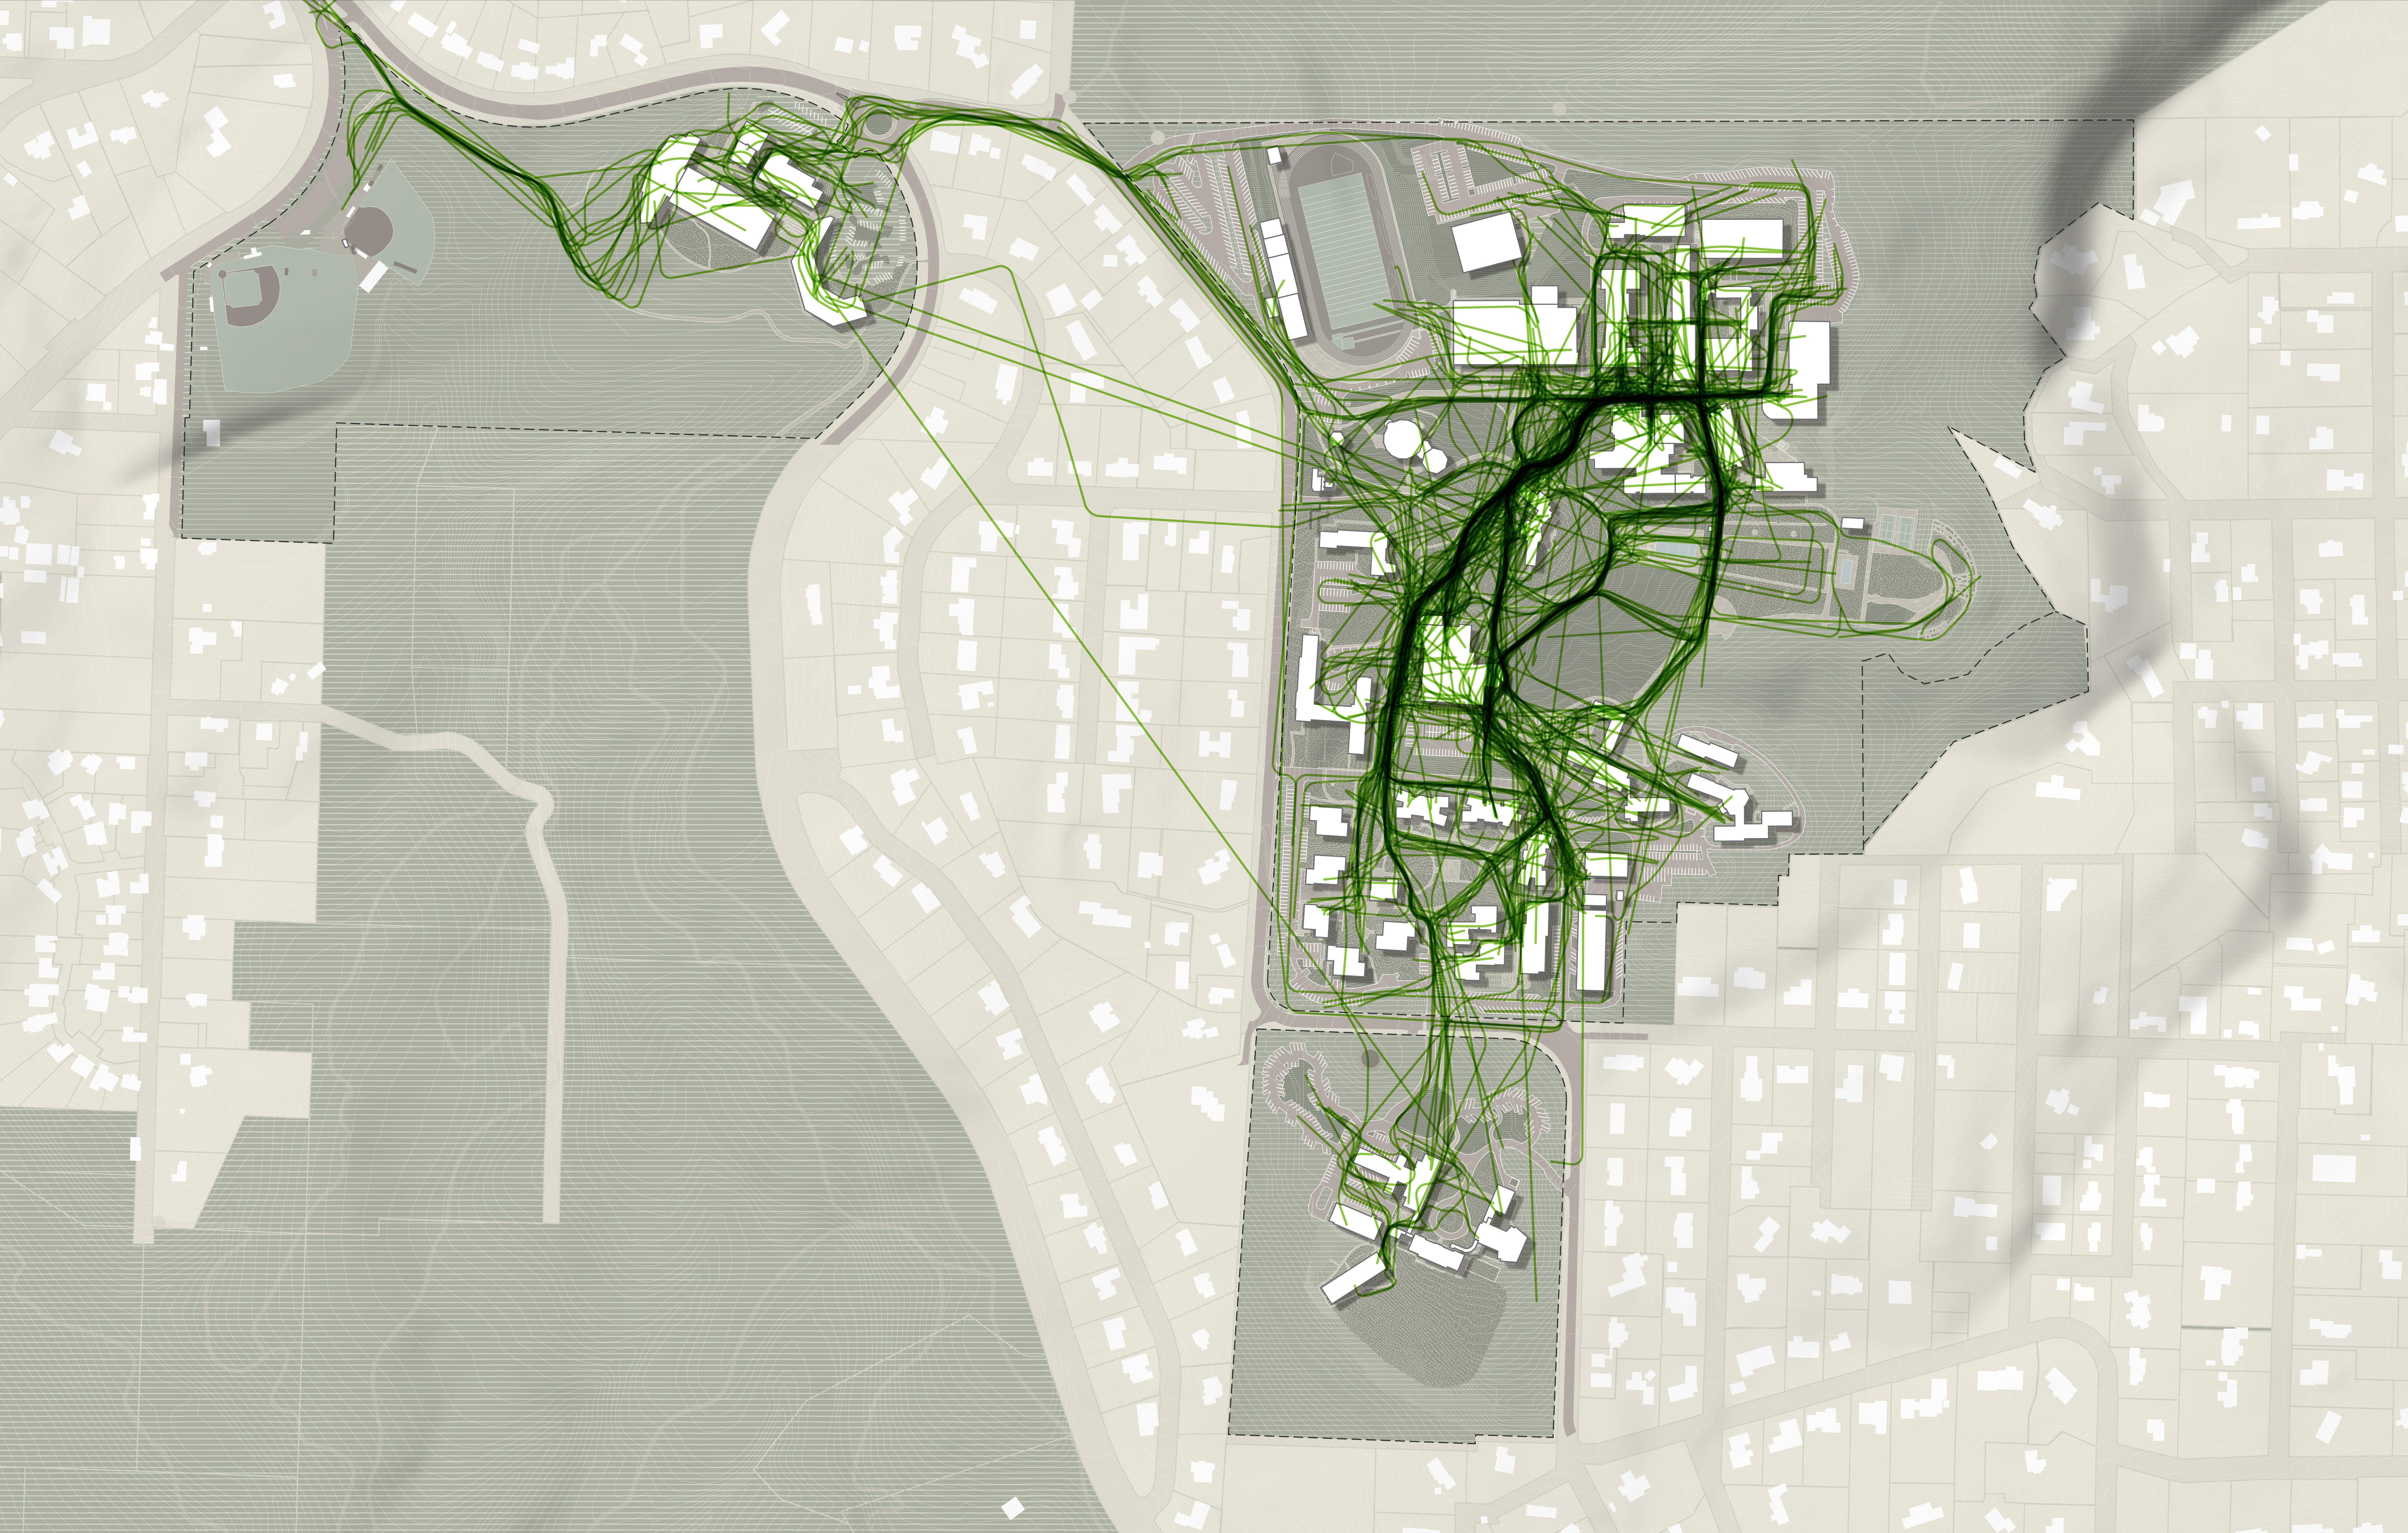 Data visualization showing that most pedestrian movement on campus is concentrated along a campus spine